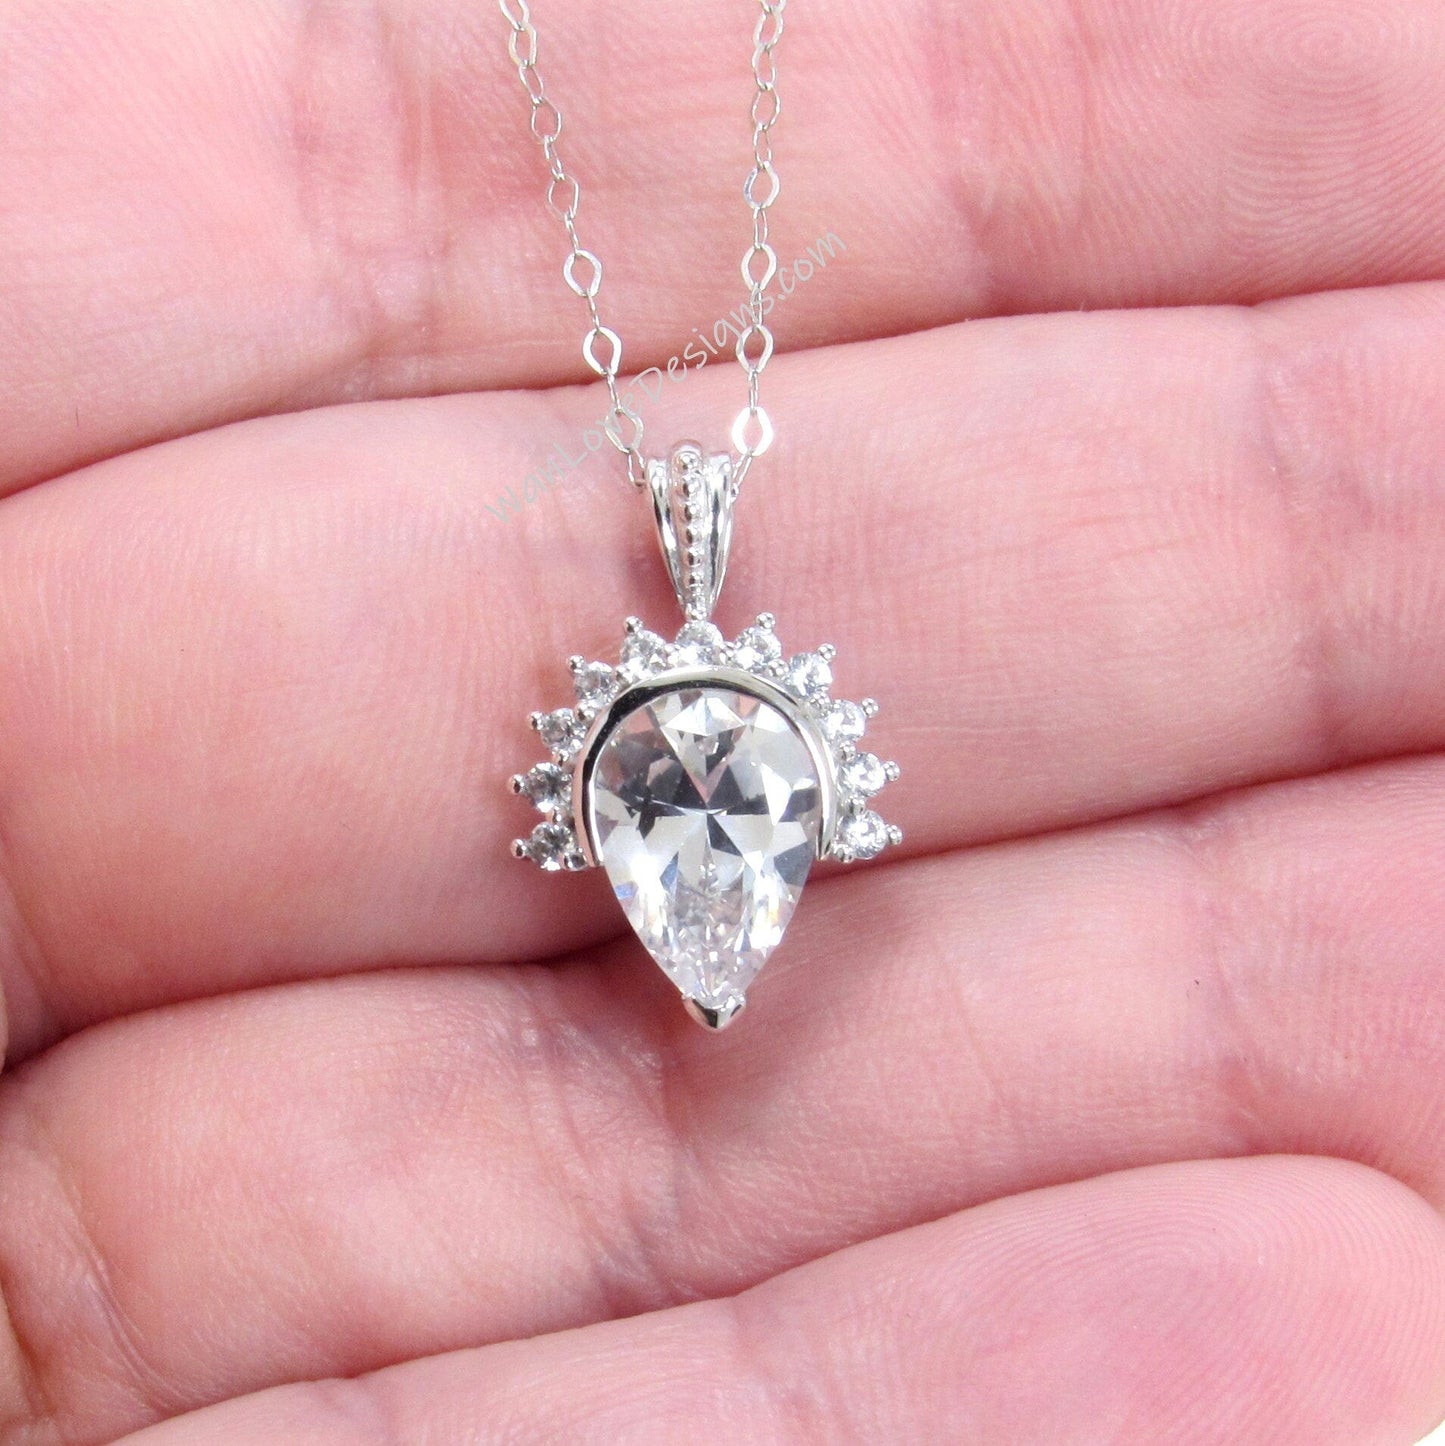 2ct Half Halo Pear Necklace - White Gold Pear Necklace Charm - Vintage style Necklace - White Gold Chain - Wedding Jewelry - Ready to Ship Wan Love Designs